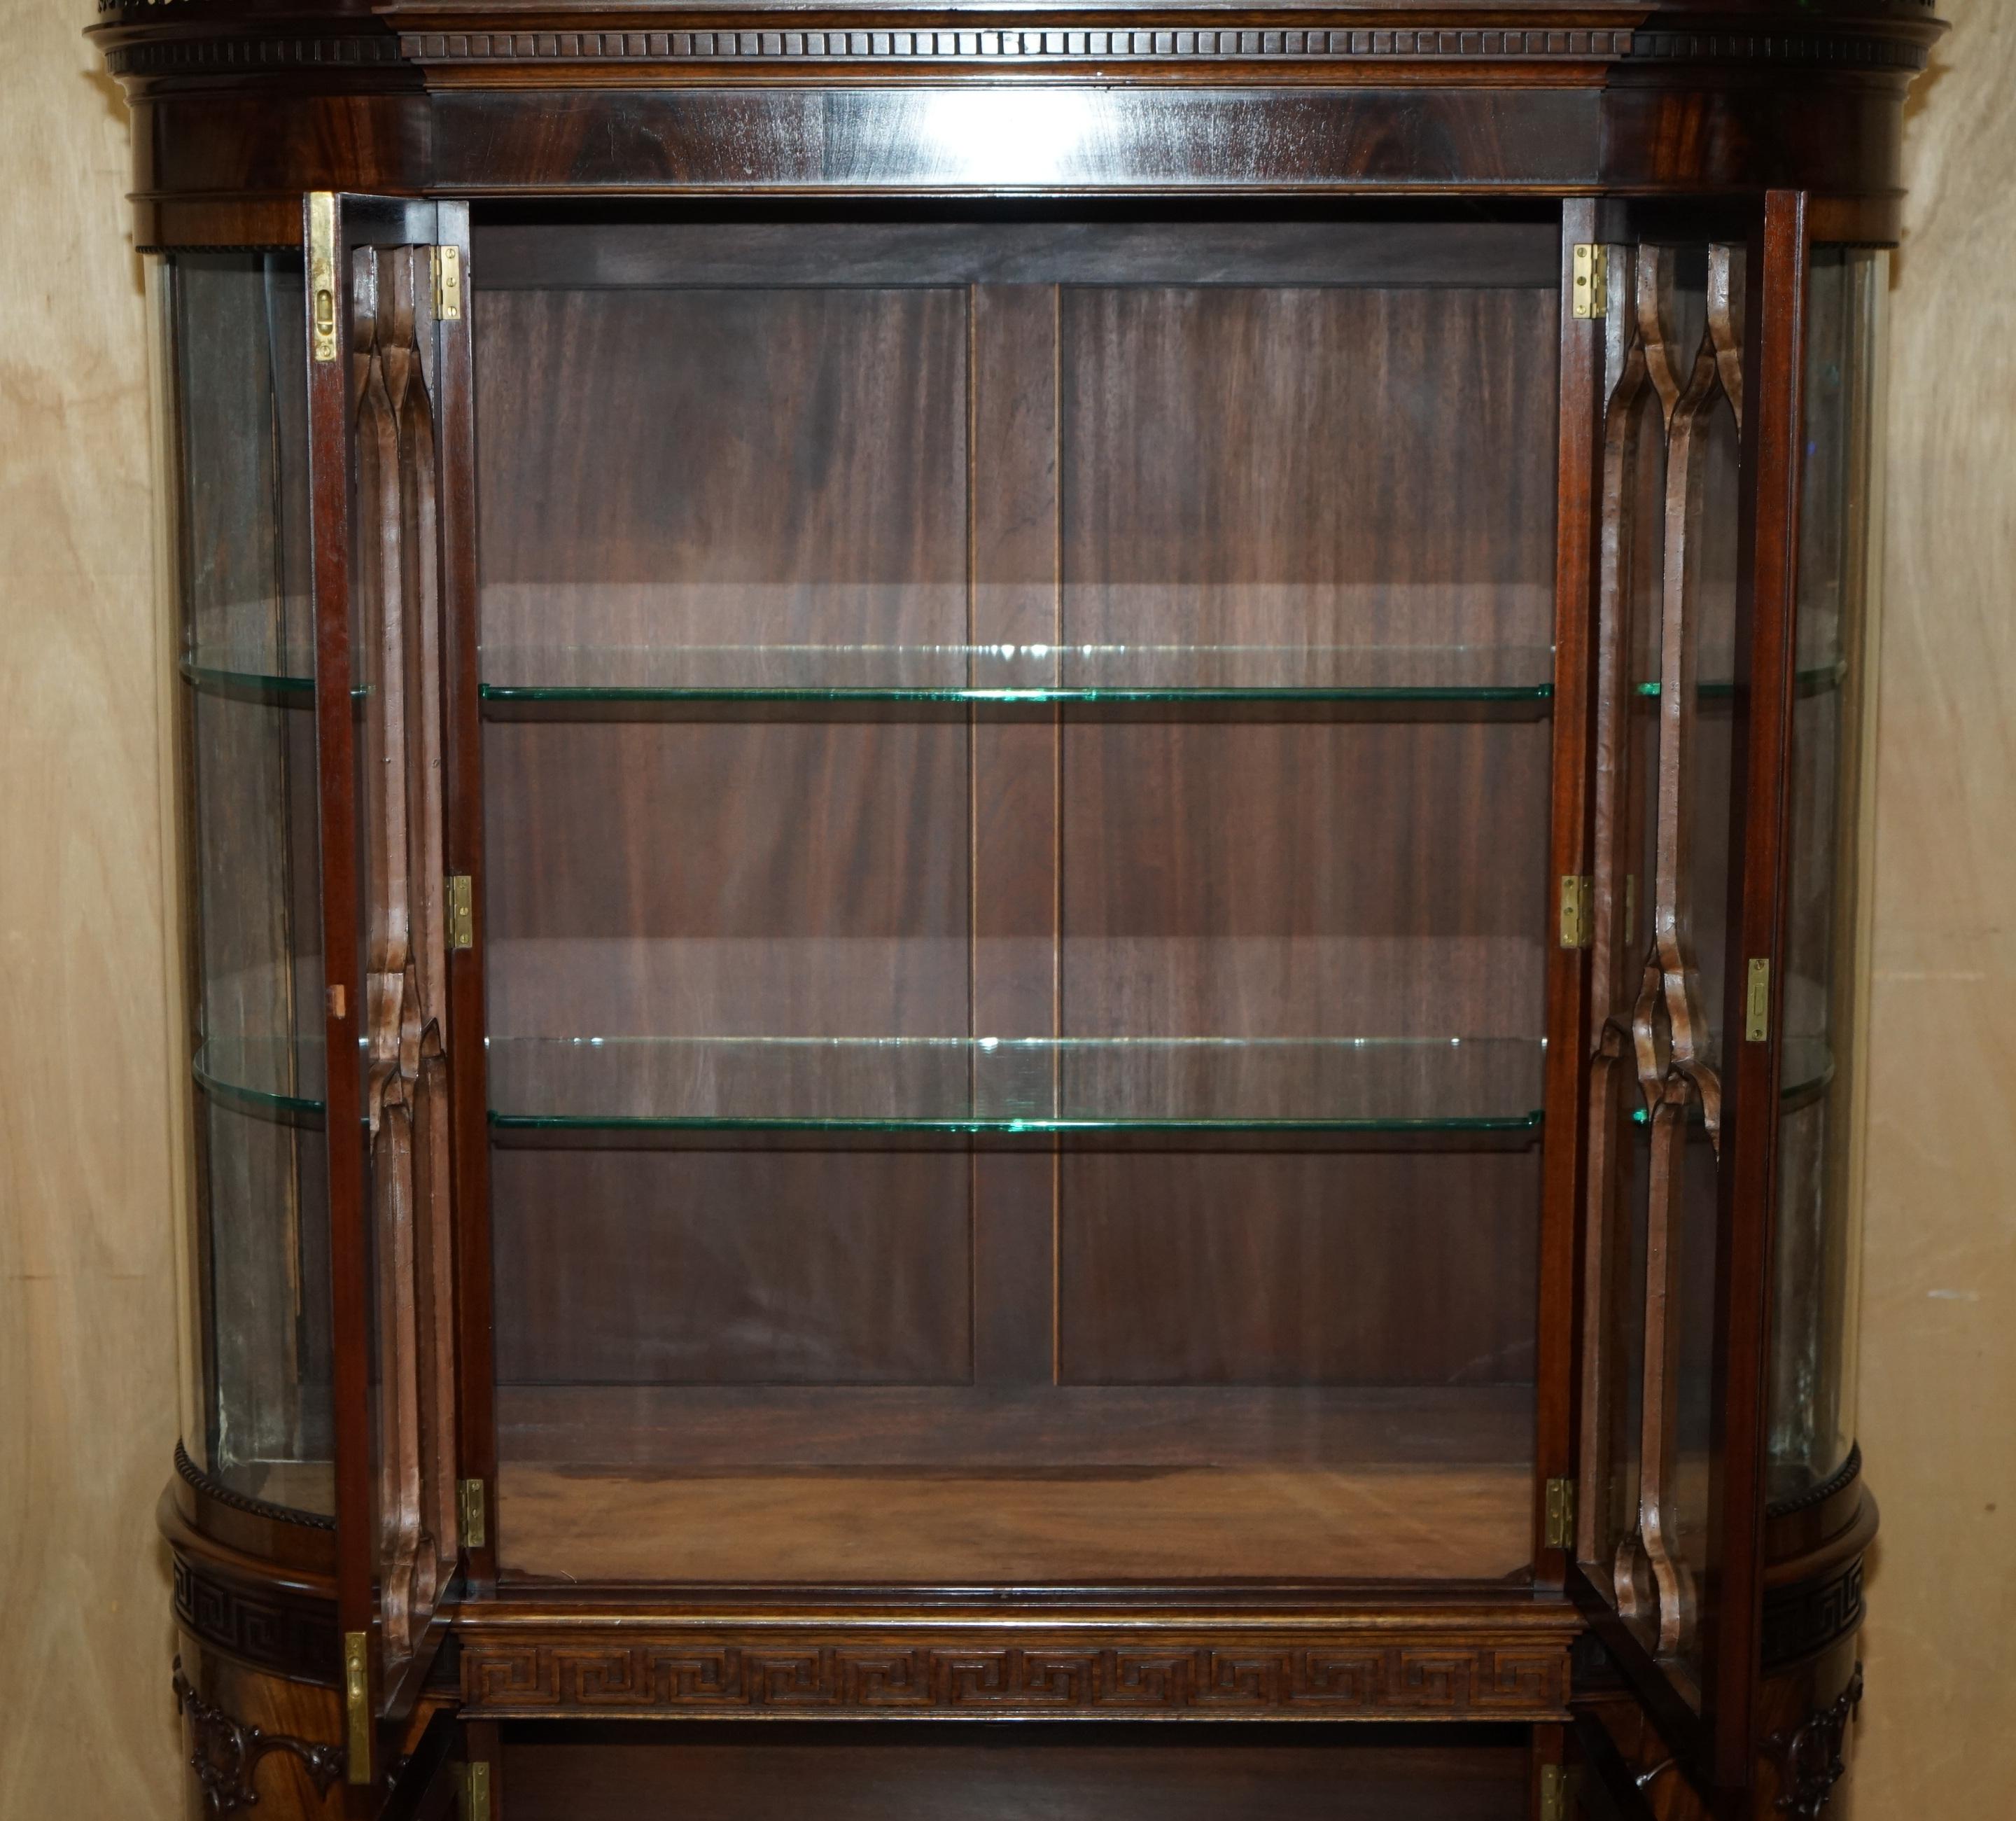 Exquisite ANTIQUE CHARLES BAker OF CHIPPENDALE HOUSE STAMPED DISPLAY CABINET im Angebot 12